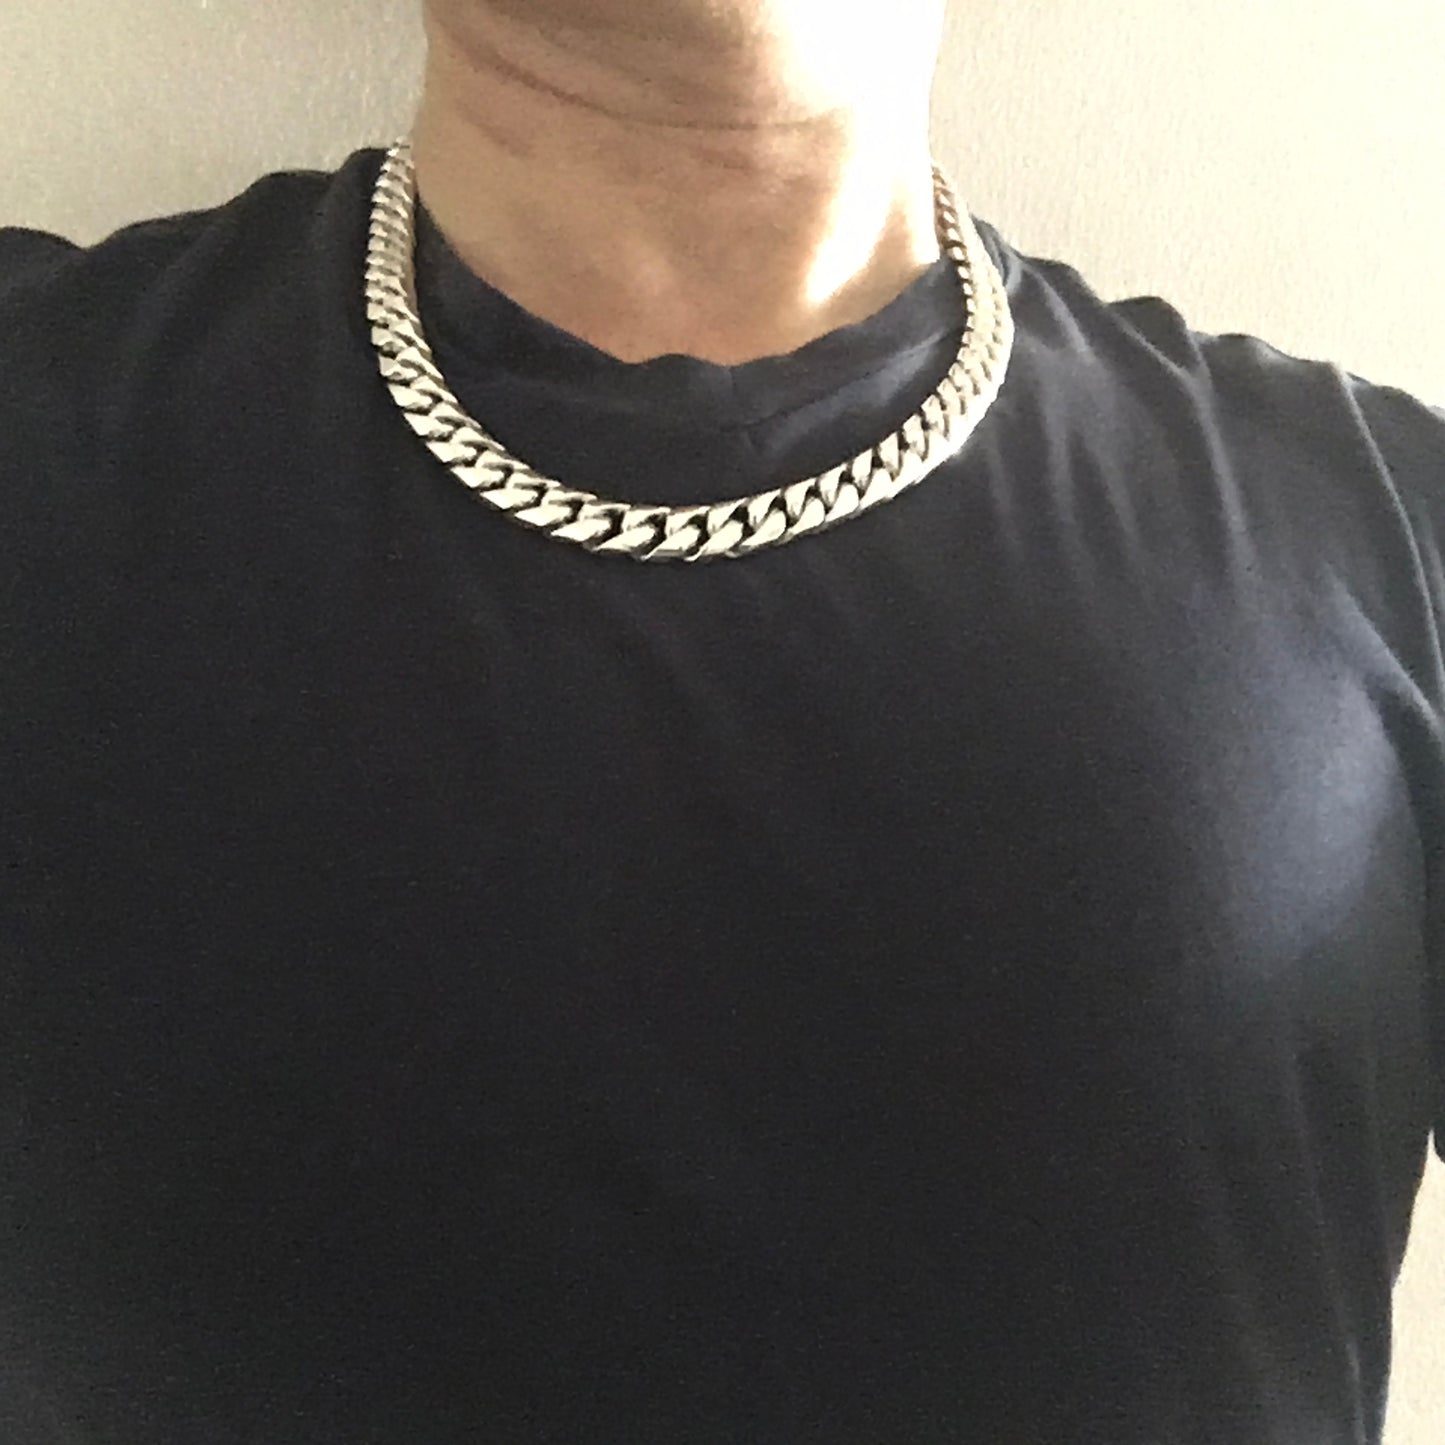 10mm Miami Cuban Link Chain Necklace